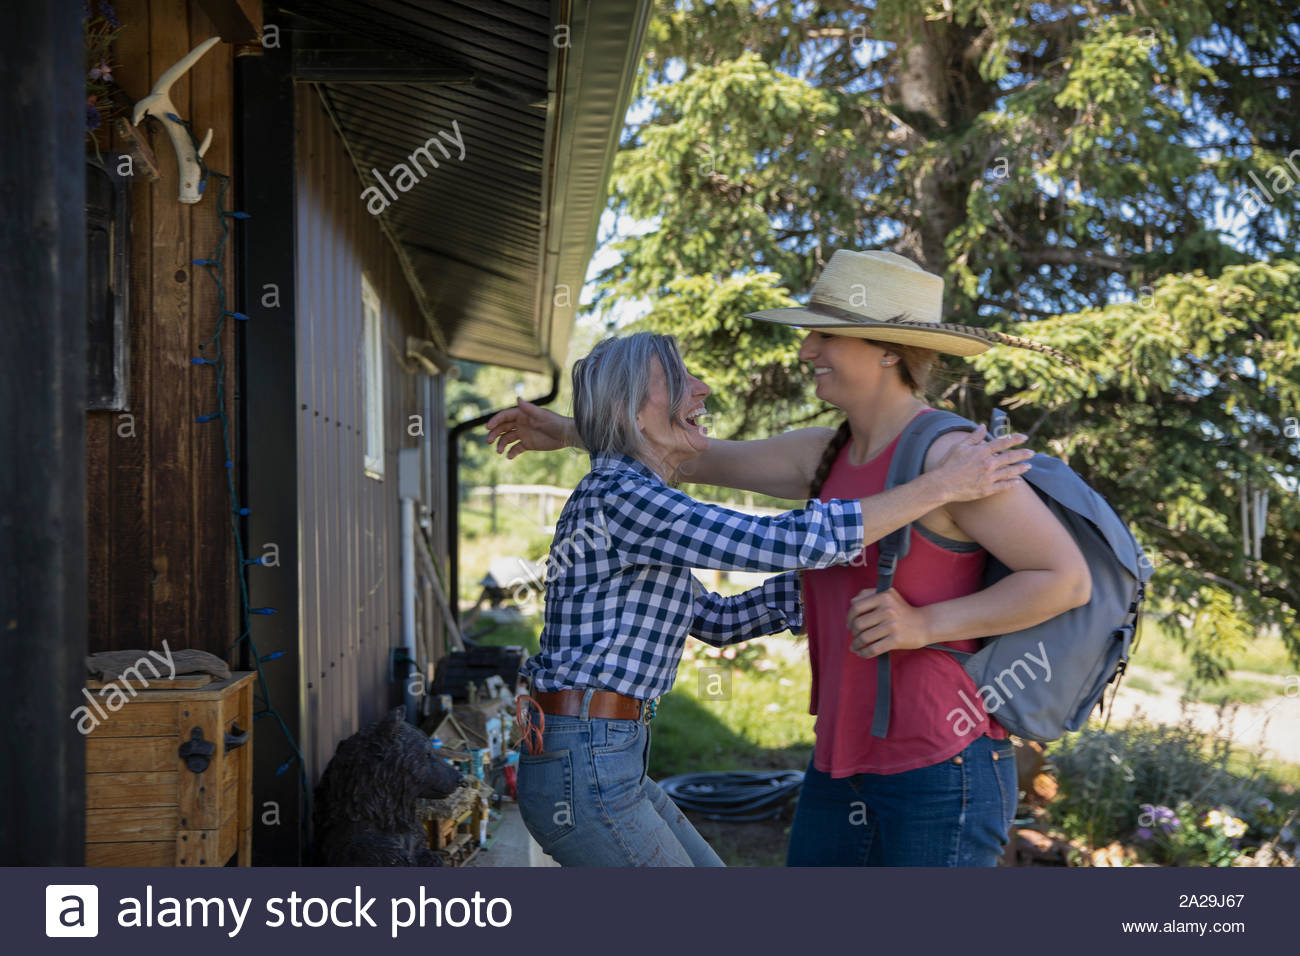 Daughter arriving home to ranch and hugging mother Stock Photo